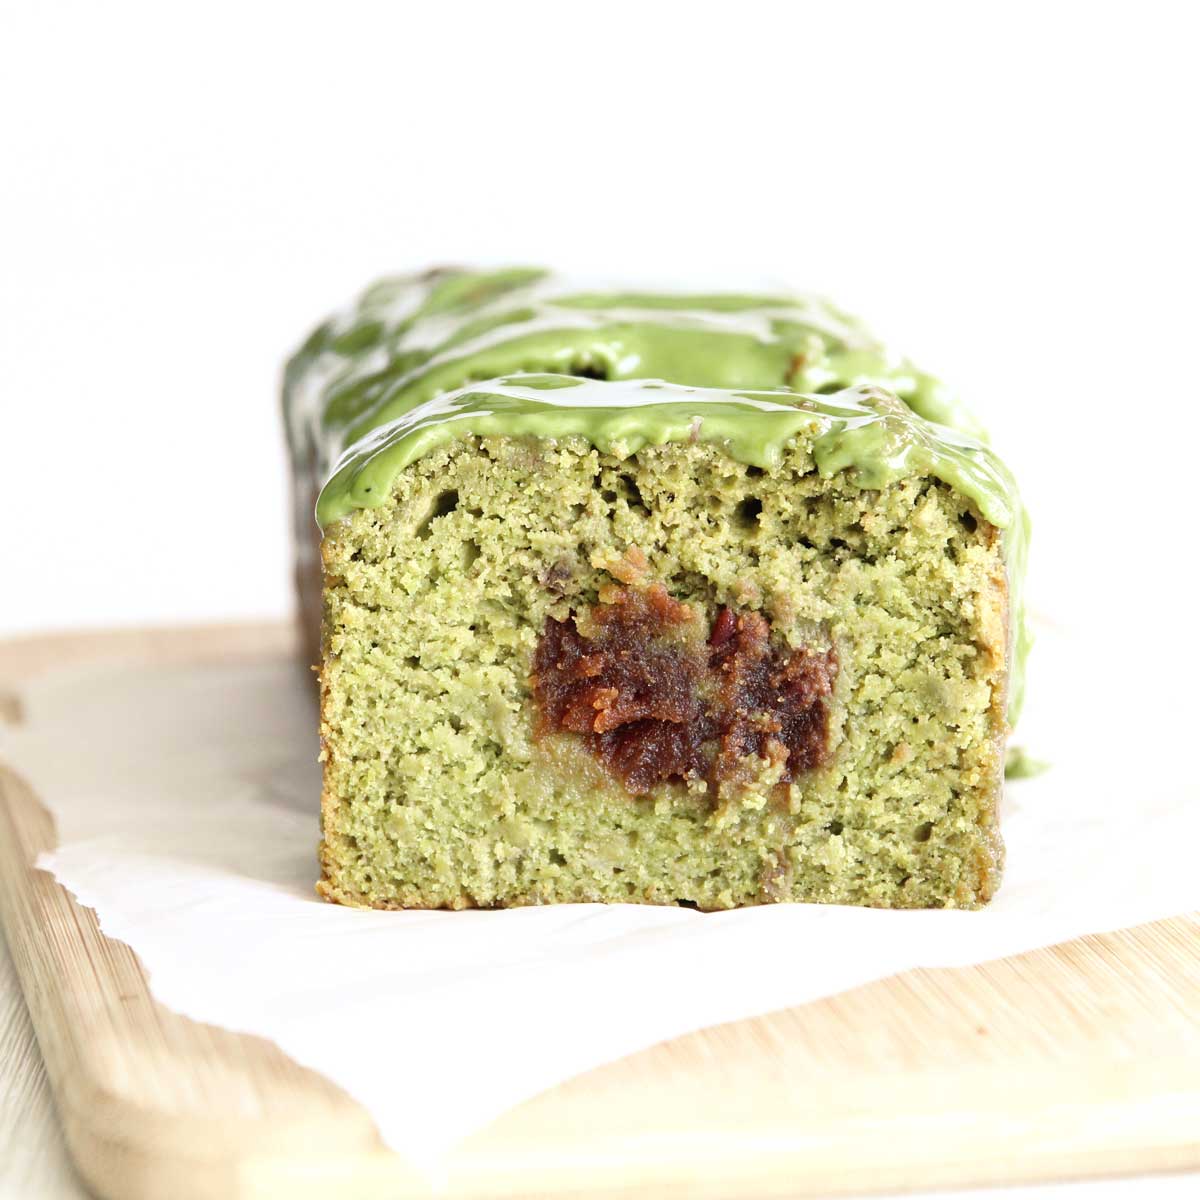 How to Make Matcha Banana Bread with Red Bean Paste Filling - Brown Sugar Whipped Cream